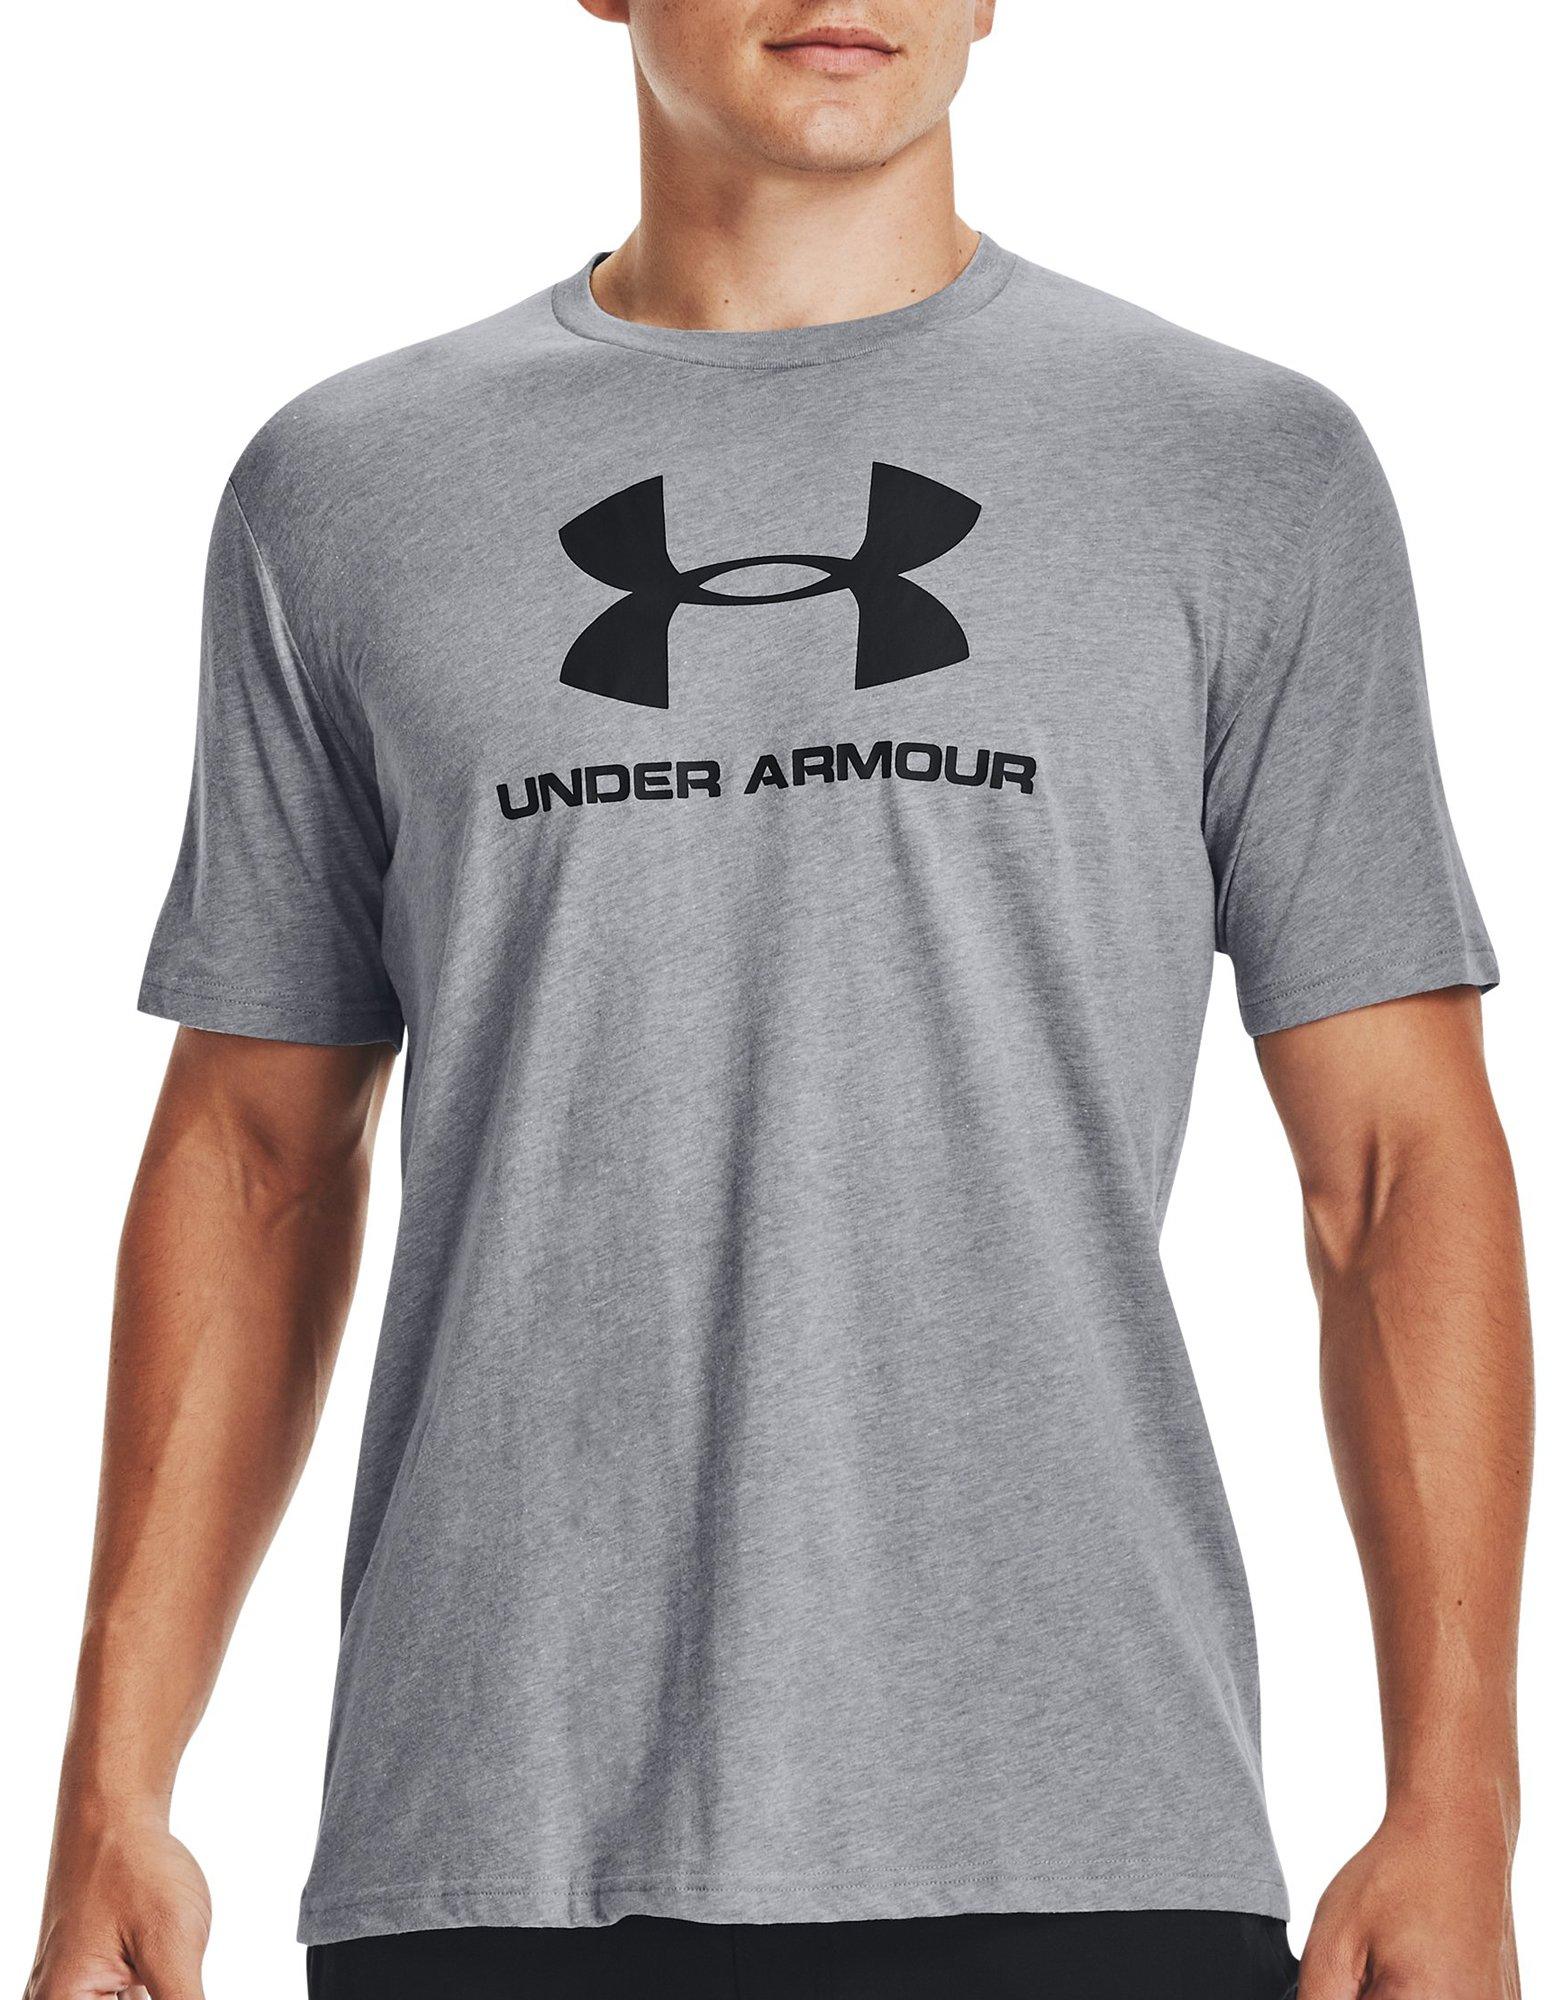 Mens Under Armour Sports Style Short Sleeve T-Shirt